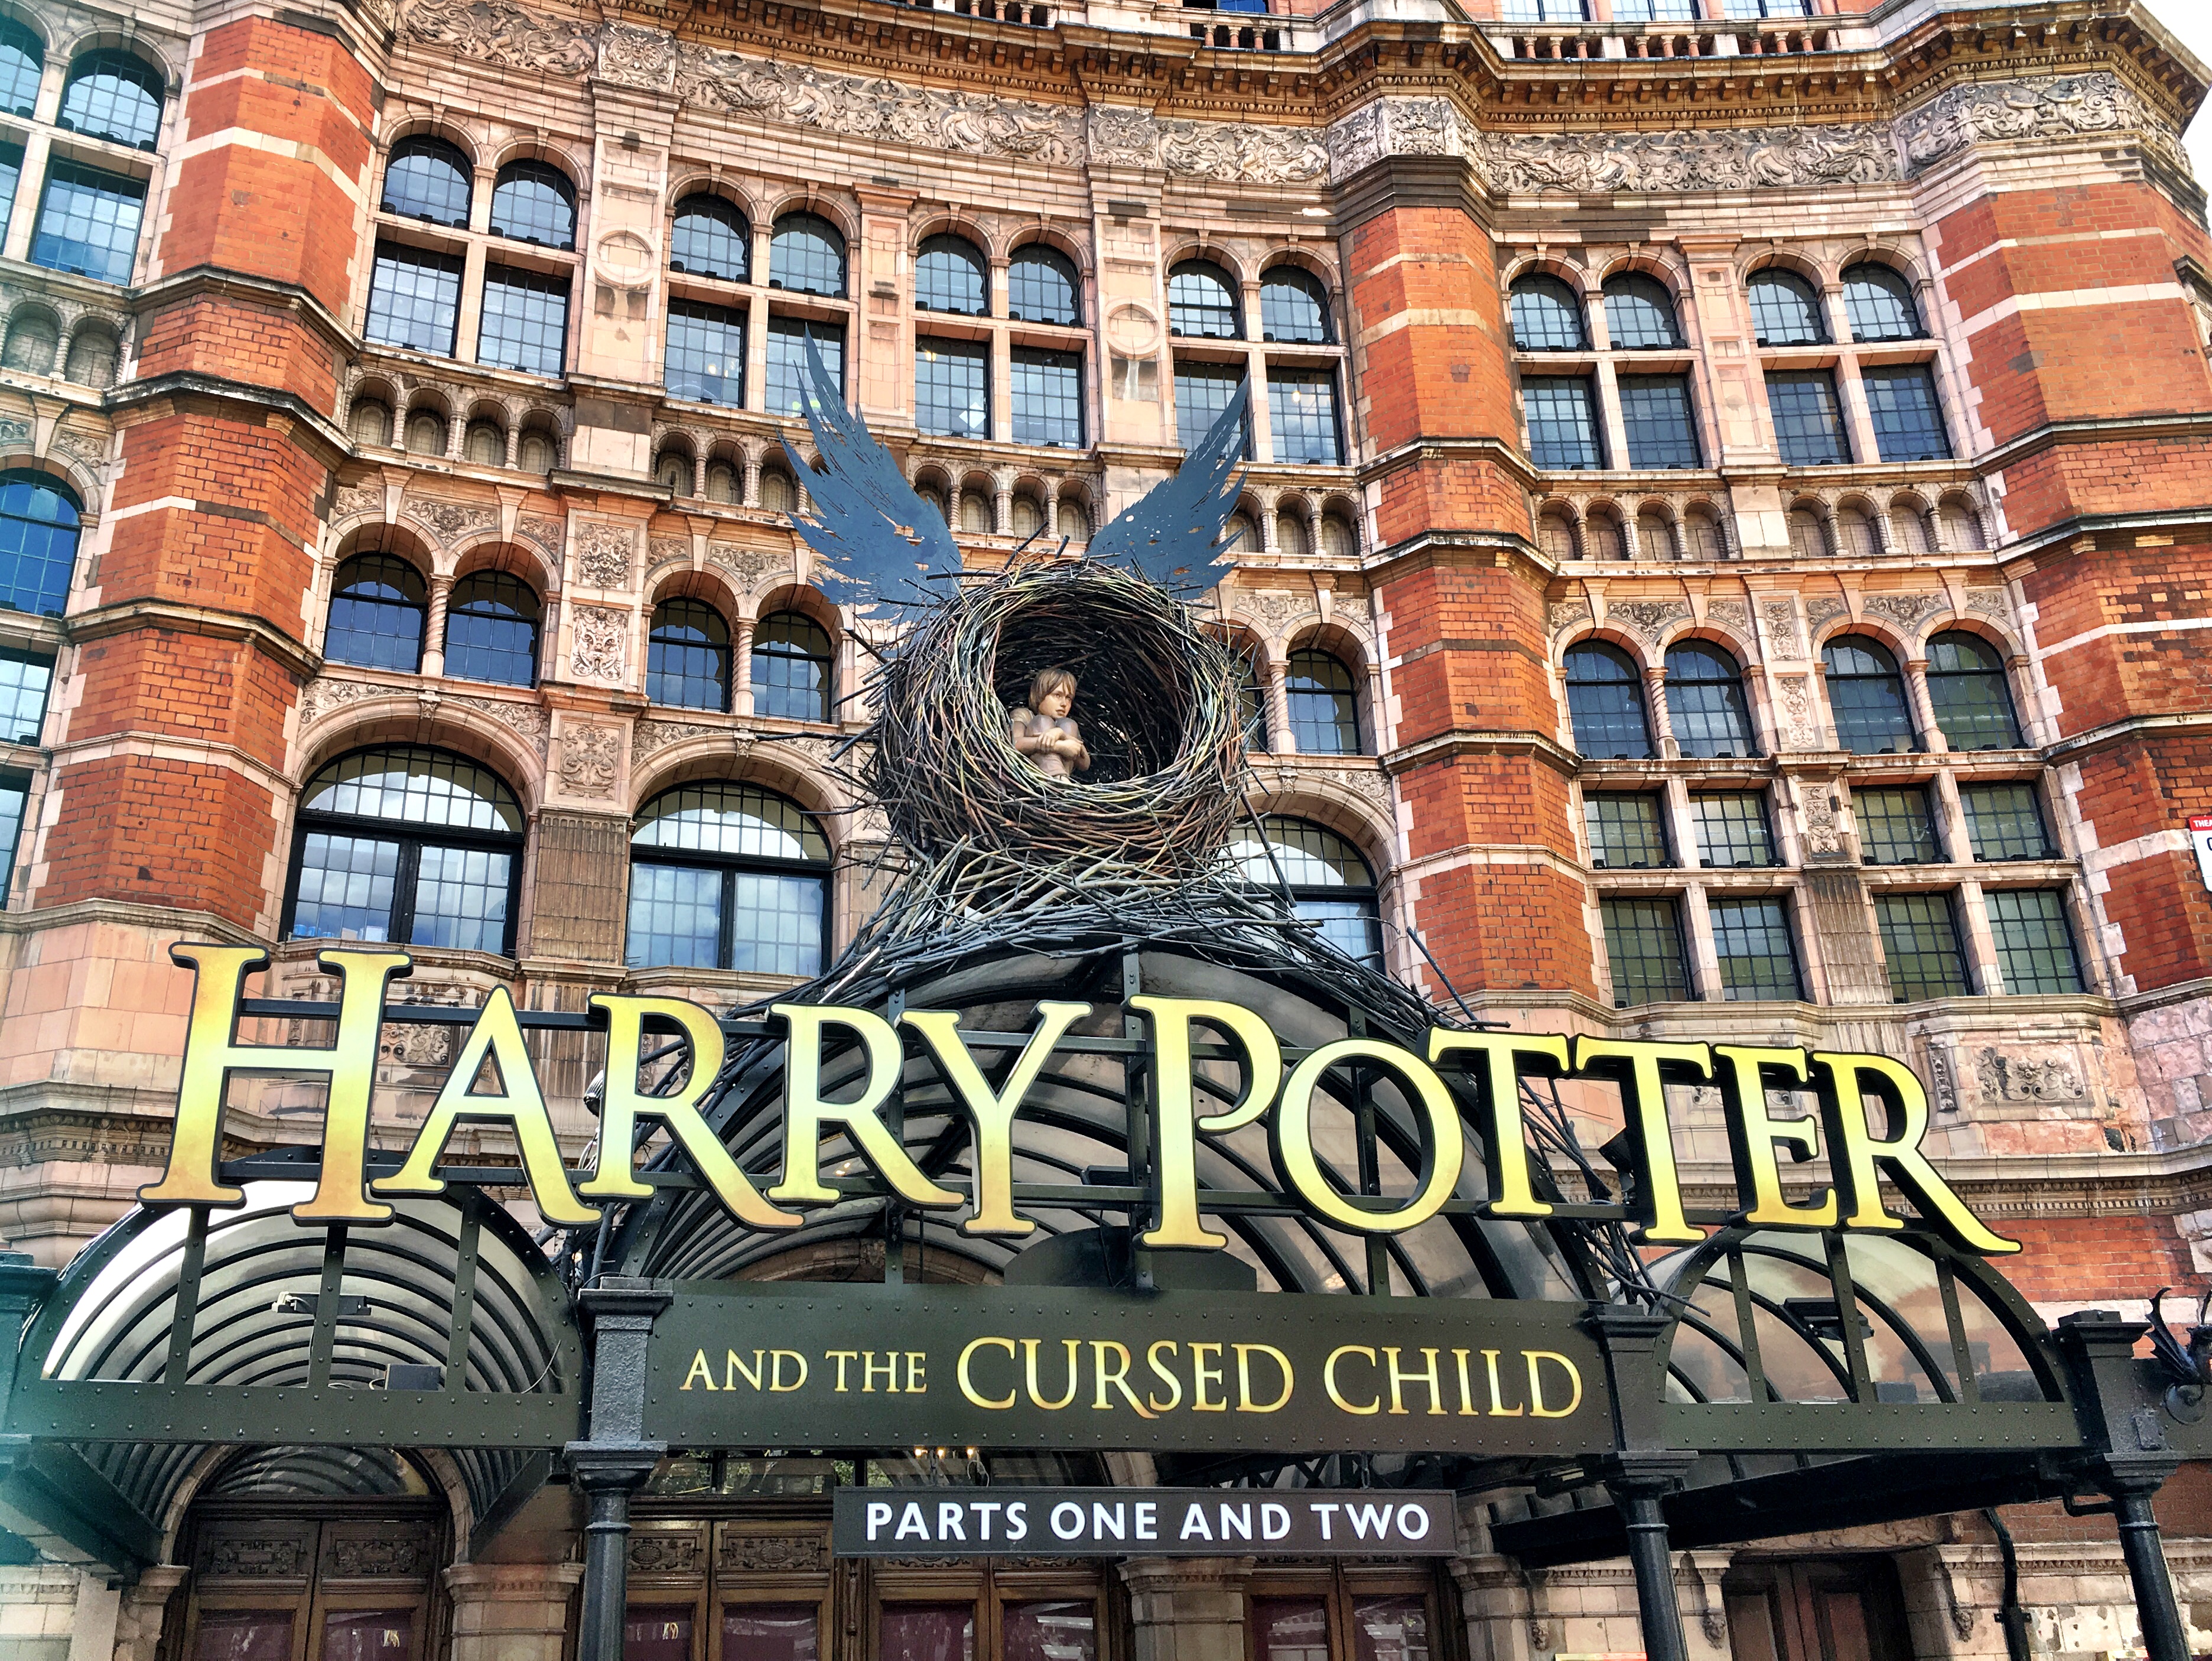 Harry Potter and the Cursed Child on London's West End